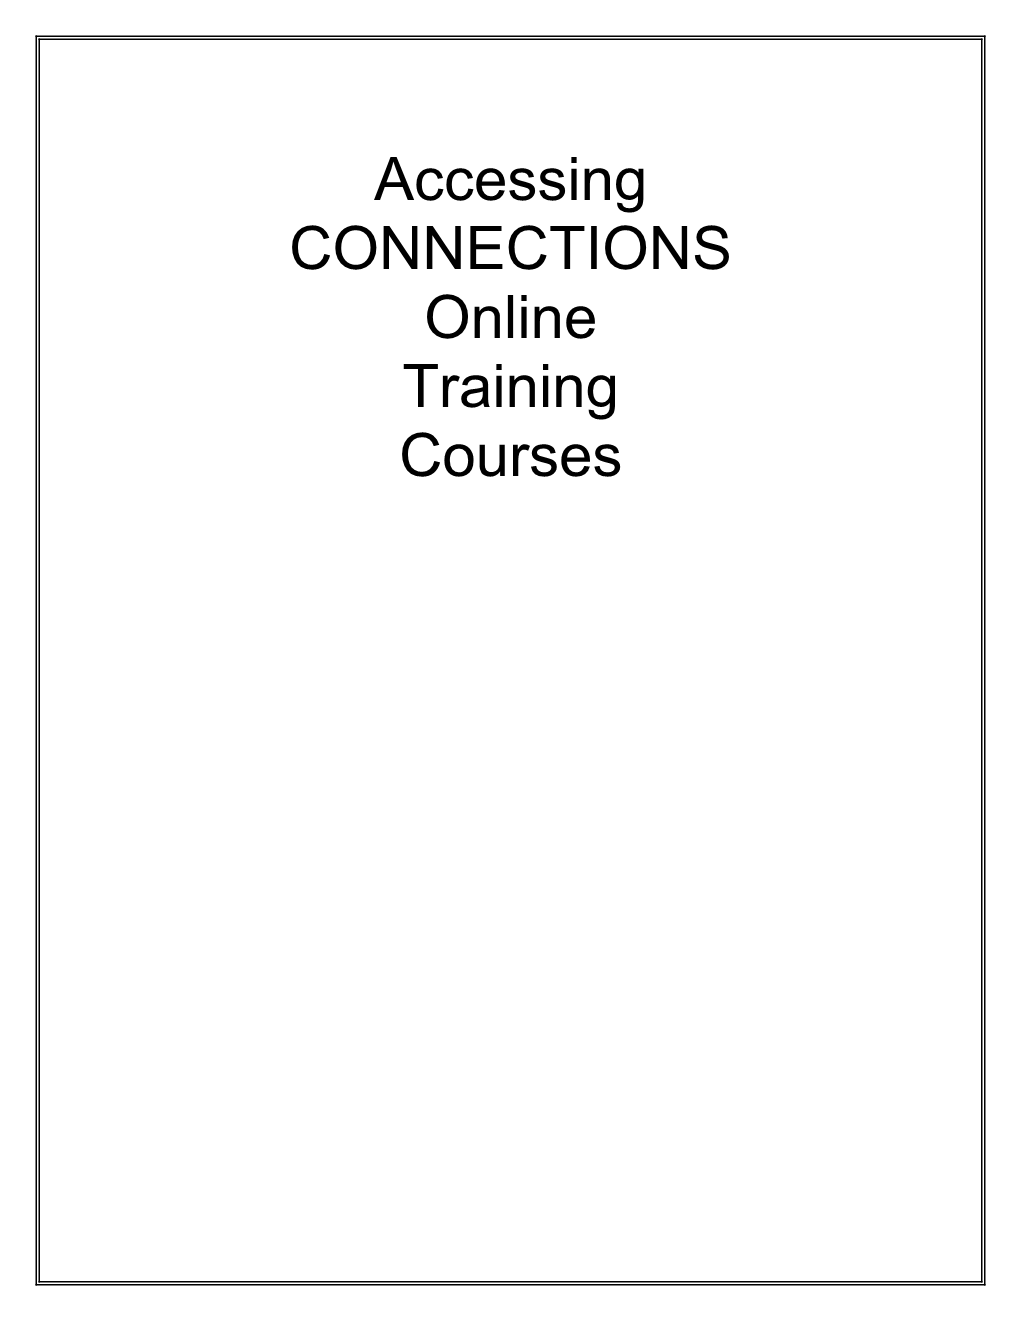 Taking an Online Training Course 2